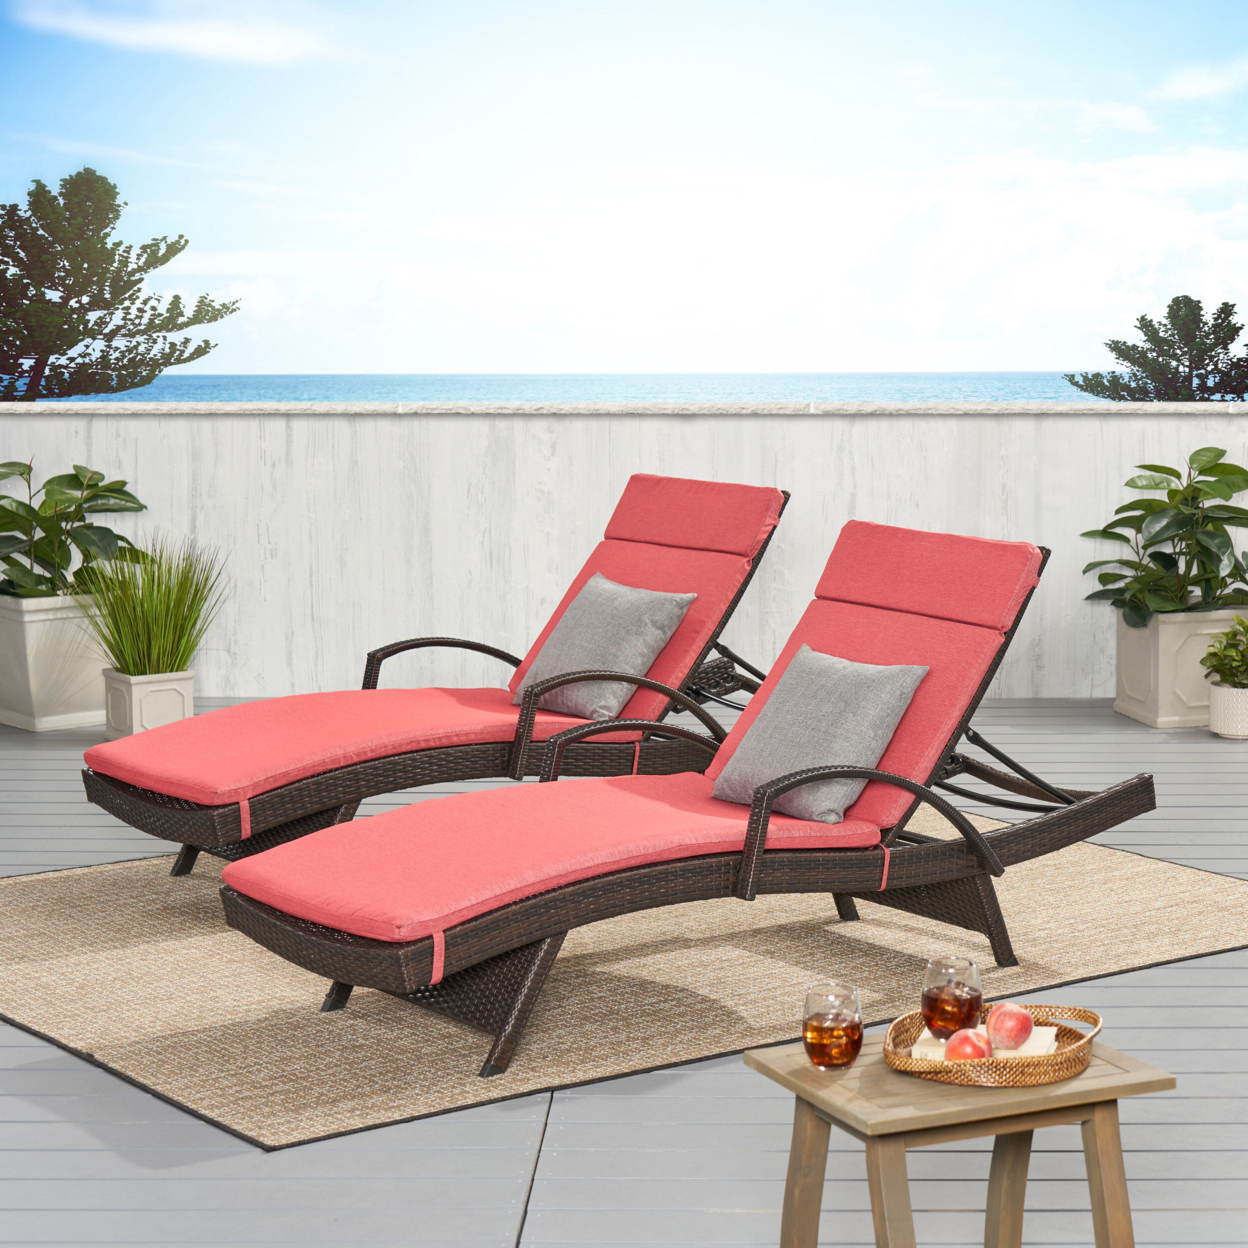 Lakeport Outdoor Wicker Armed Chaise Lounge Chairs With Cushions (set Of 2) - Red Cushion